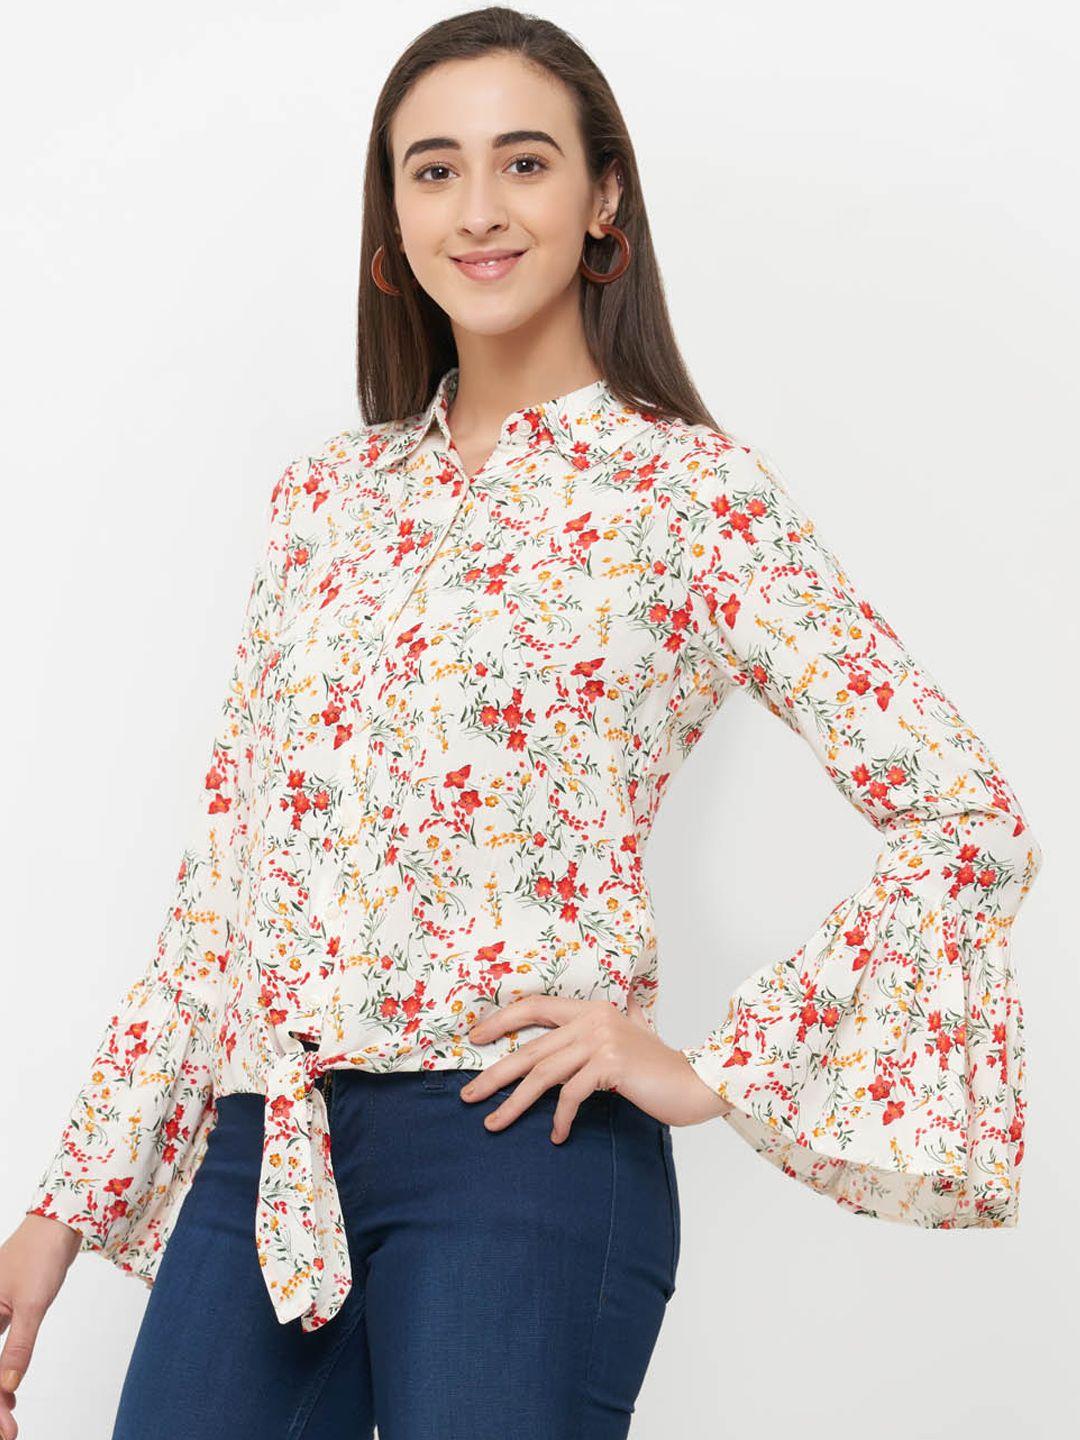 109f women beige & red printed shirt style top